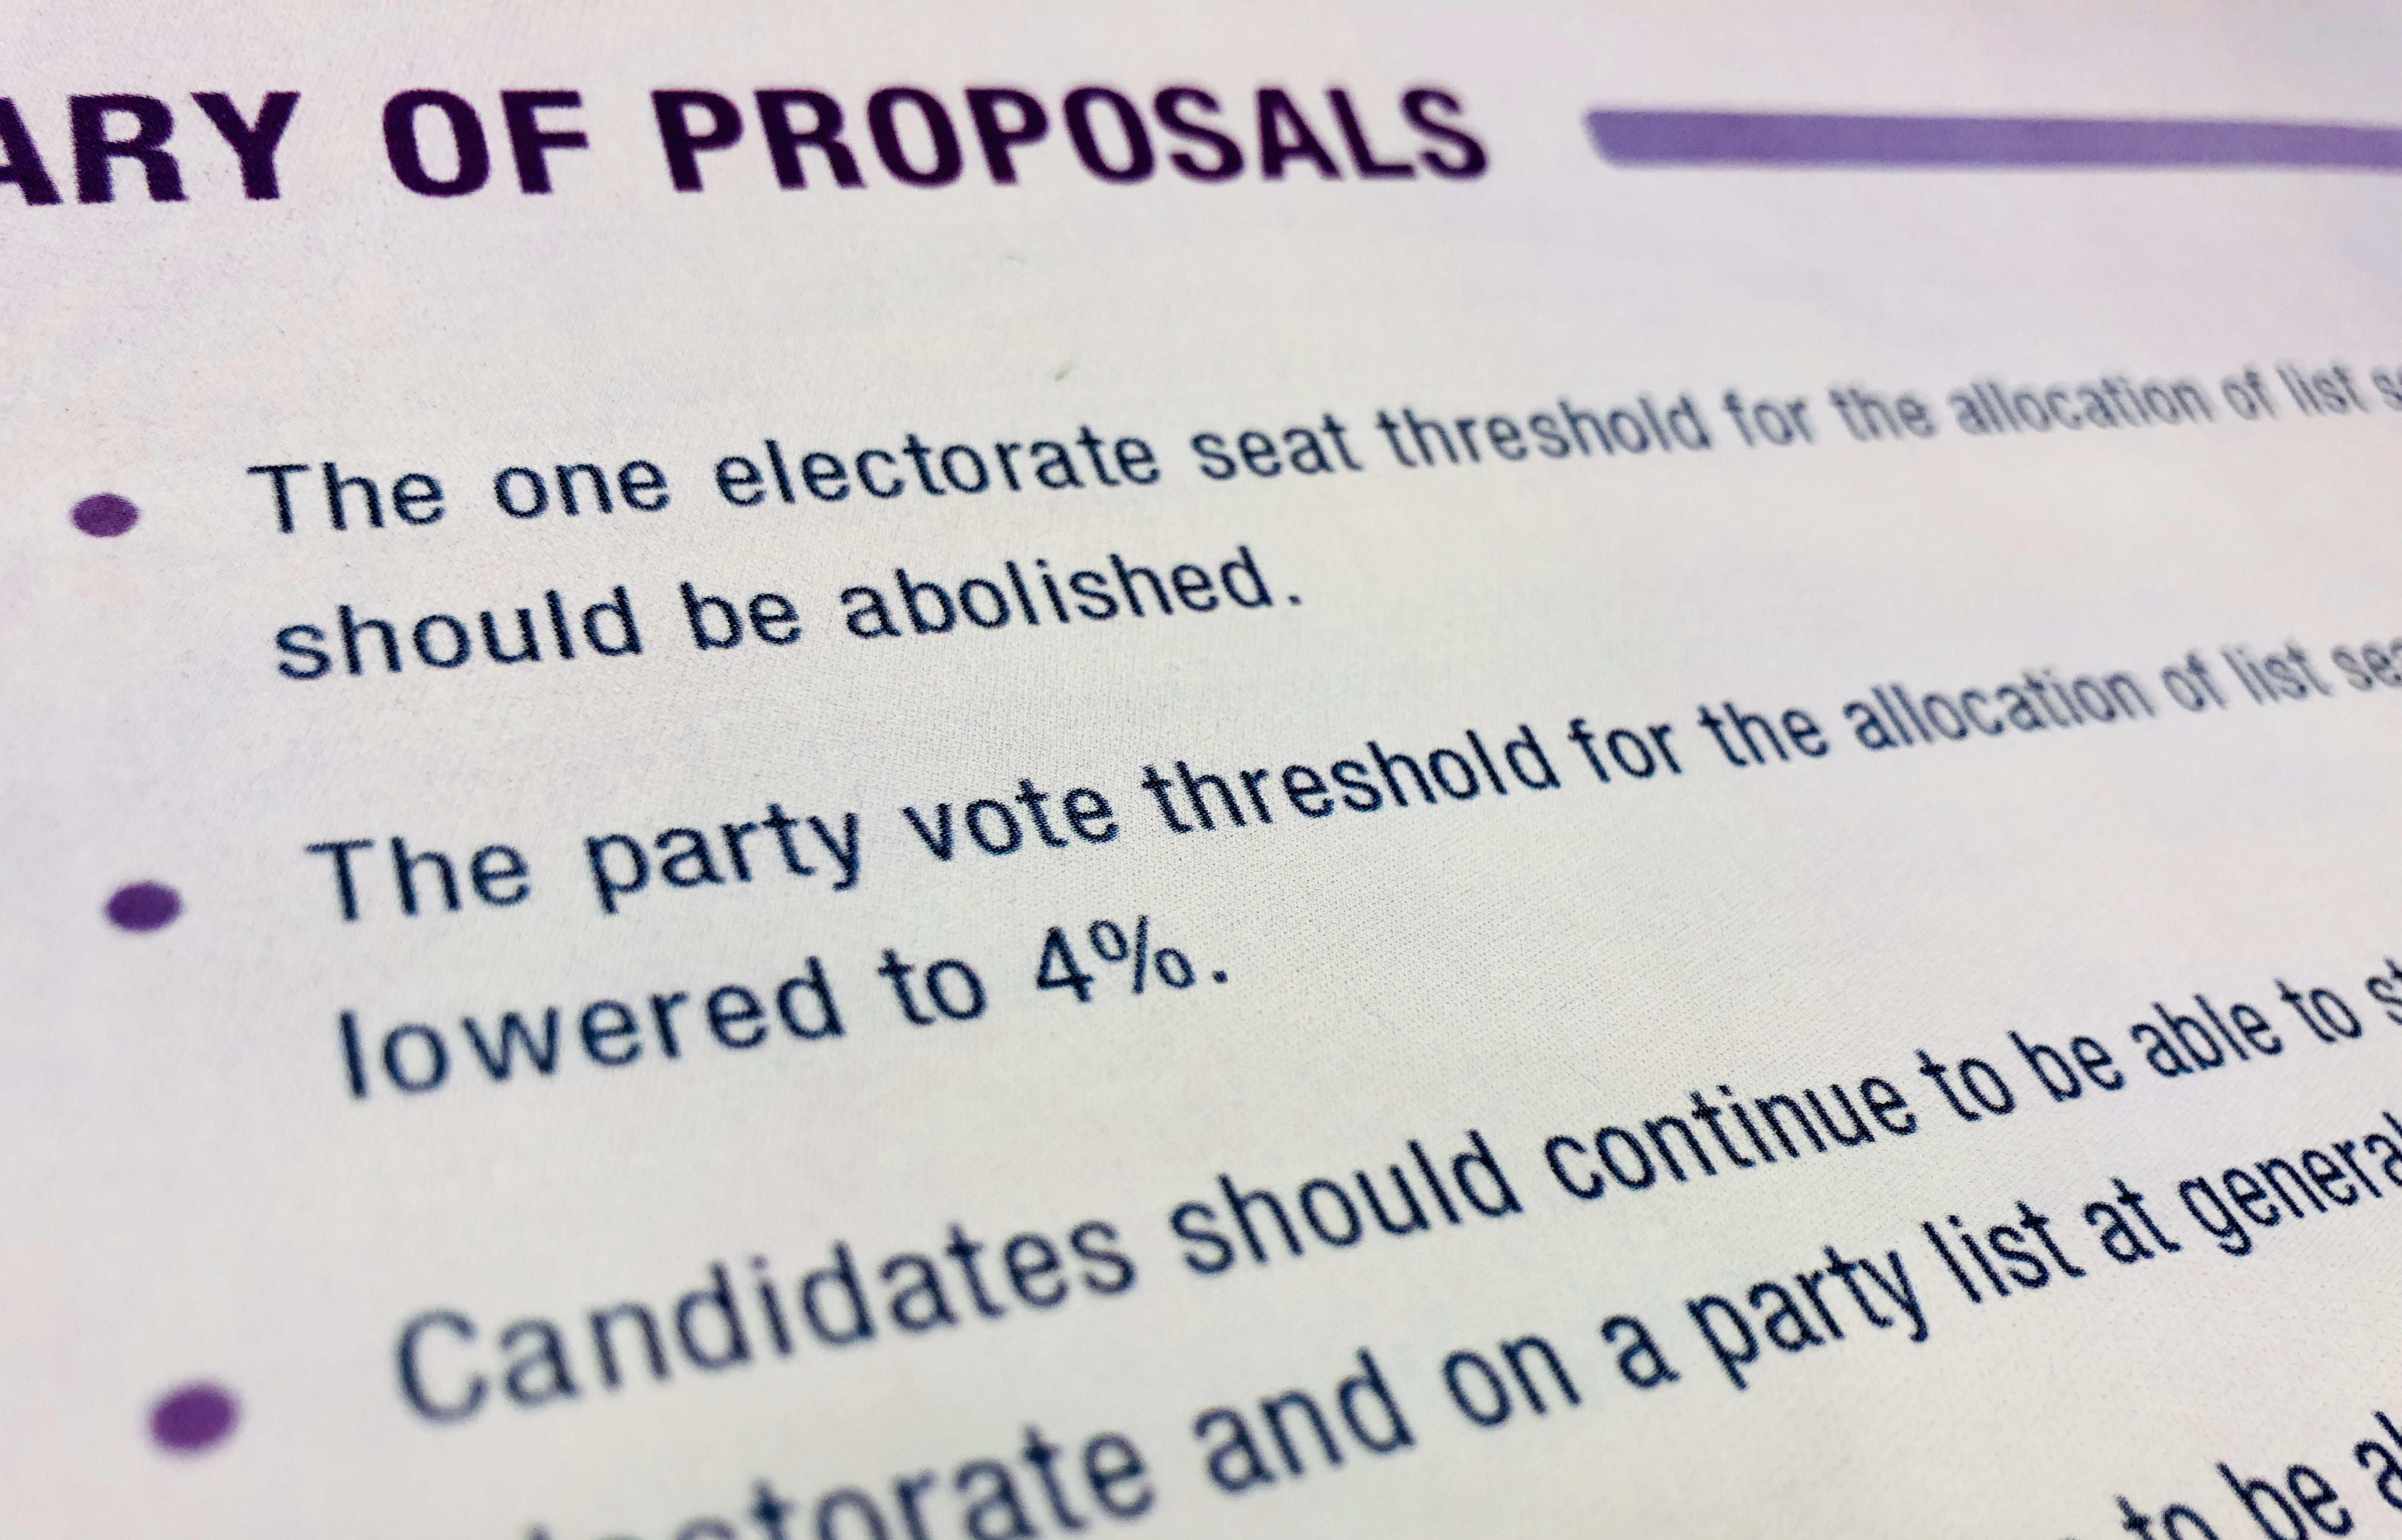 The Electoral Commission proposals paper recommended the party vote threshold be lowered to 4 percent.